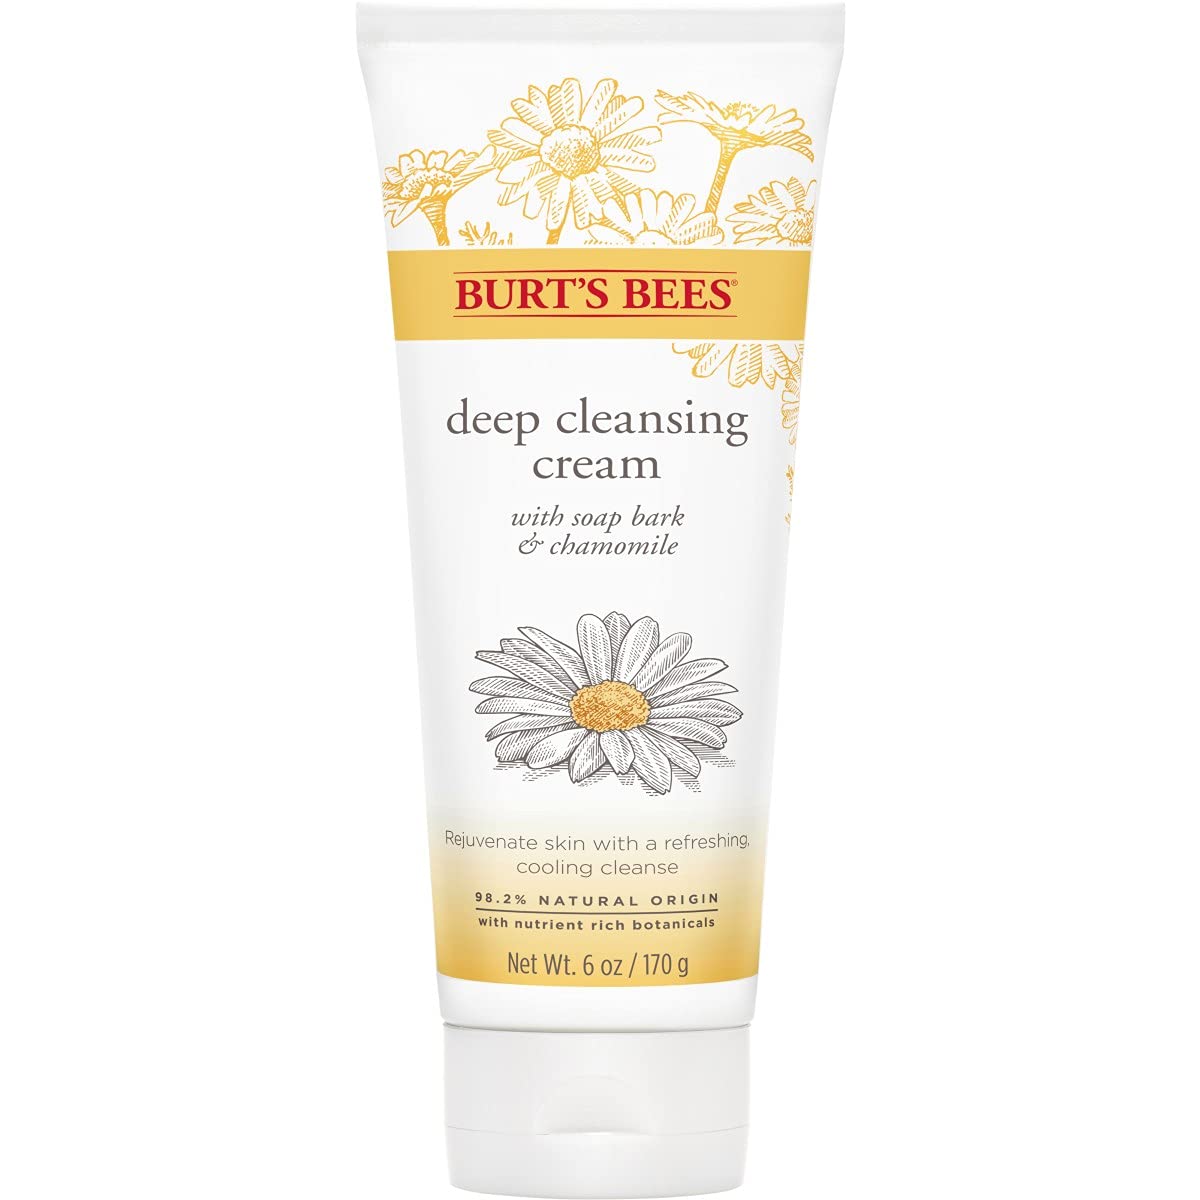 Burt's Bees Face Wash, Deep Facial Cleansing Cream, All Natural Cleanser with Chamomile, 6 Ounce (Pack of 3) (Packaging May Vary) : Facial Cleansing Products : Beauty & Personal Care